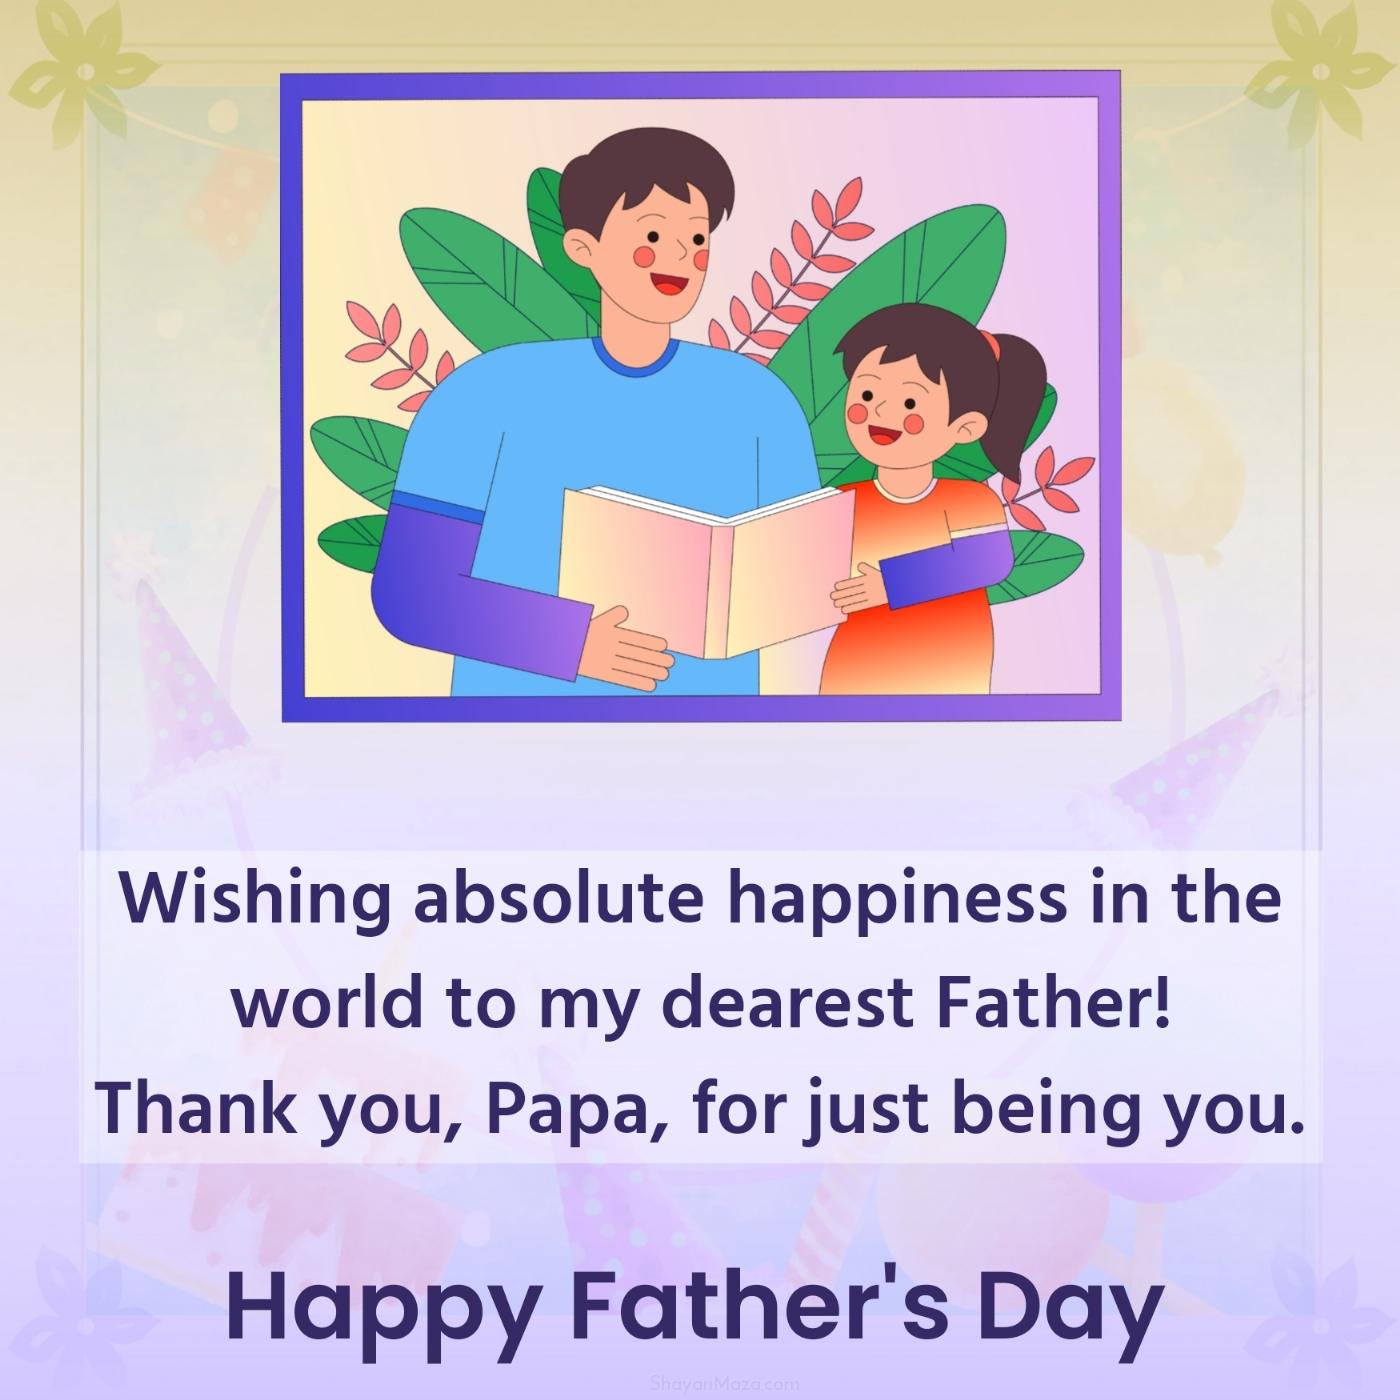 Wishing absolute happiness in the world to my dearest Father!